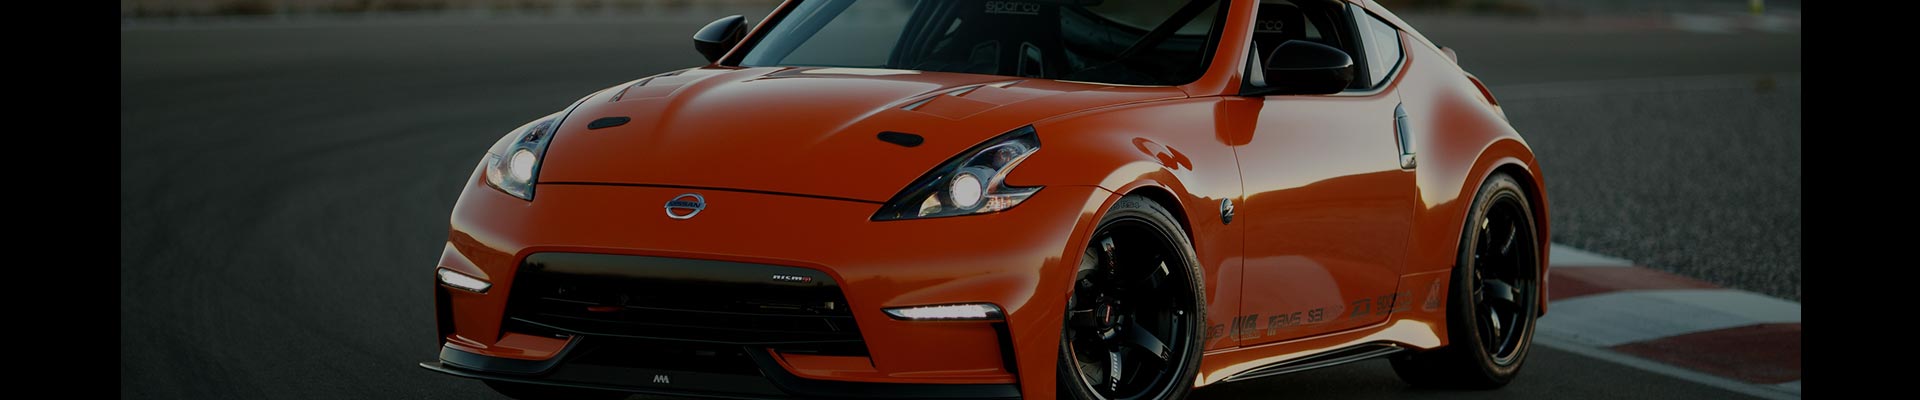 Shop Replacement and OEM 2020 Nissan 370Z Parts with Discounted Price on the Net